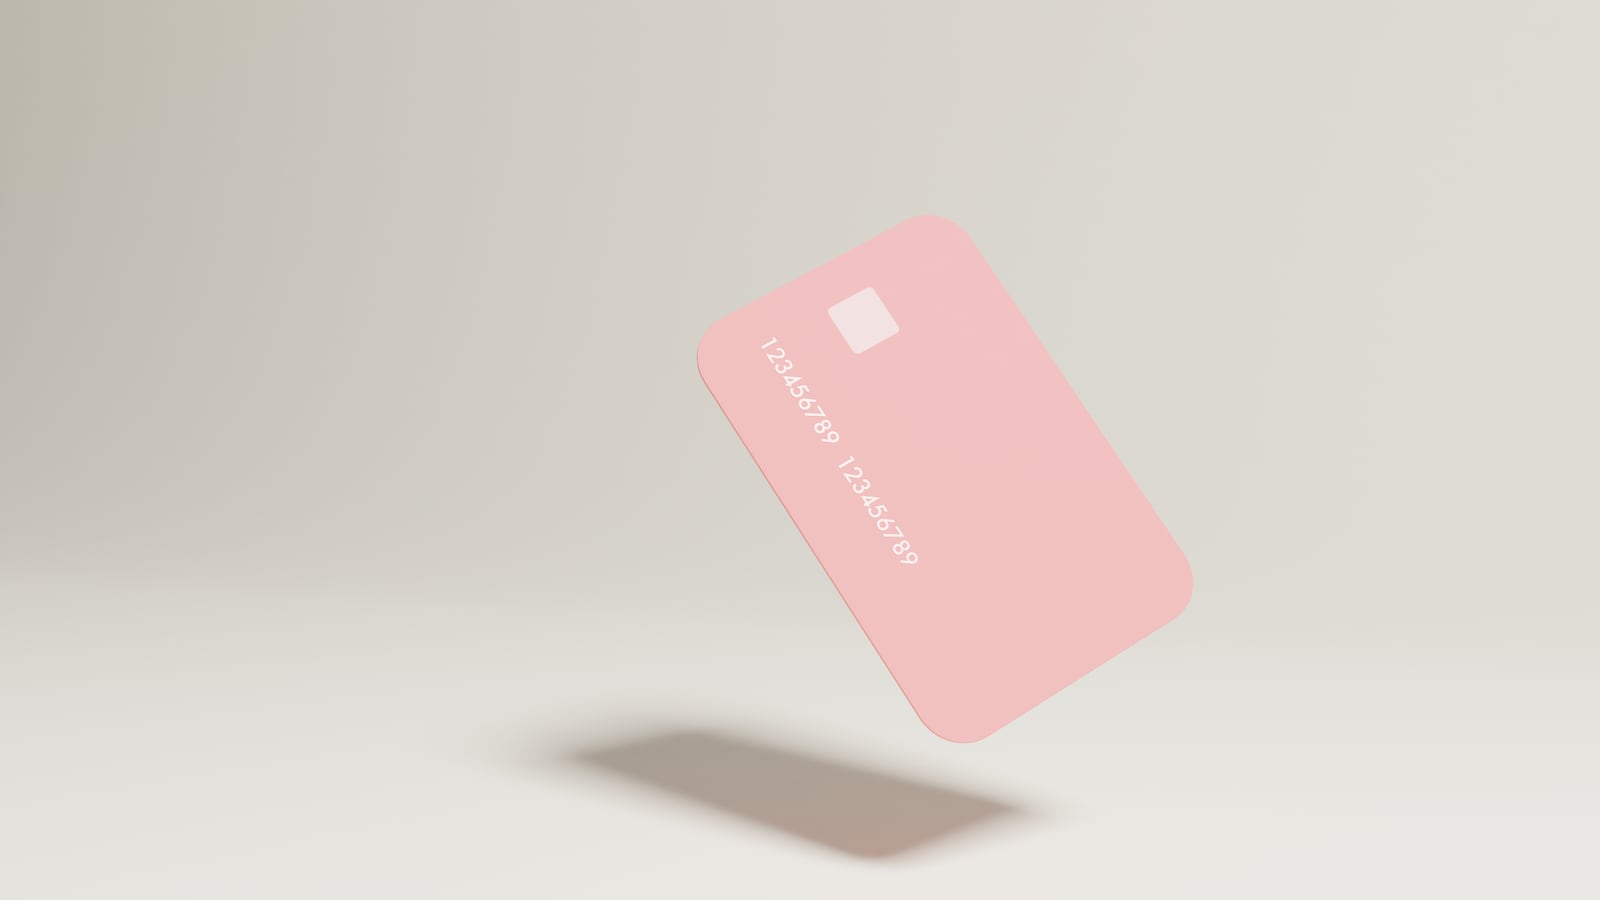 Abstract photo of a pink credit card floating in the air.